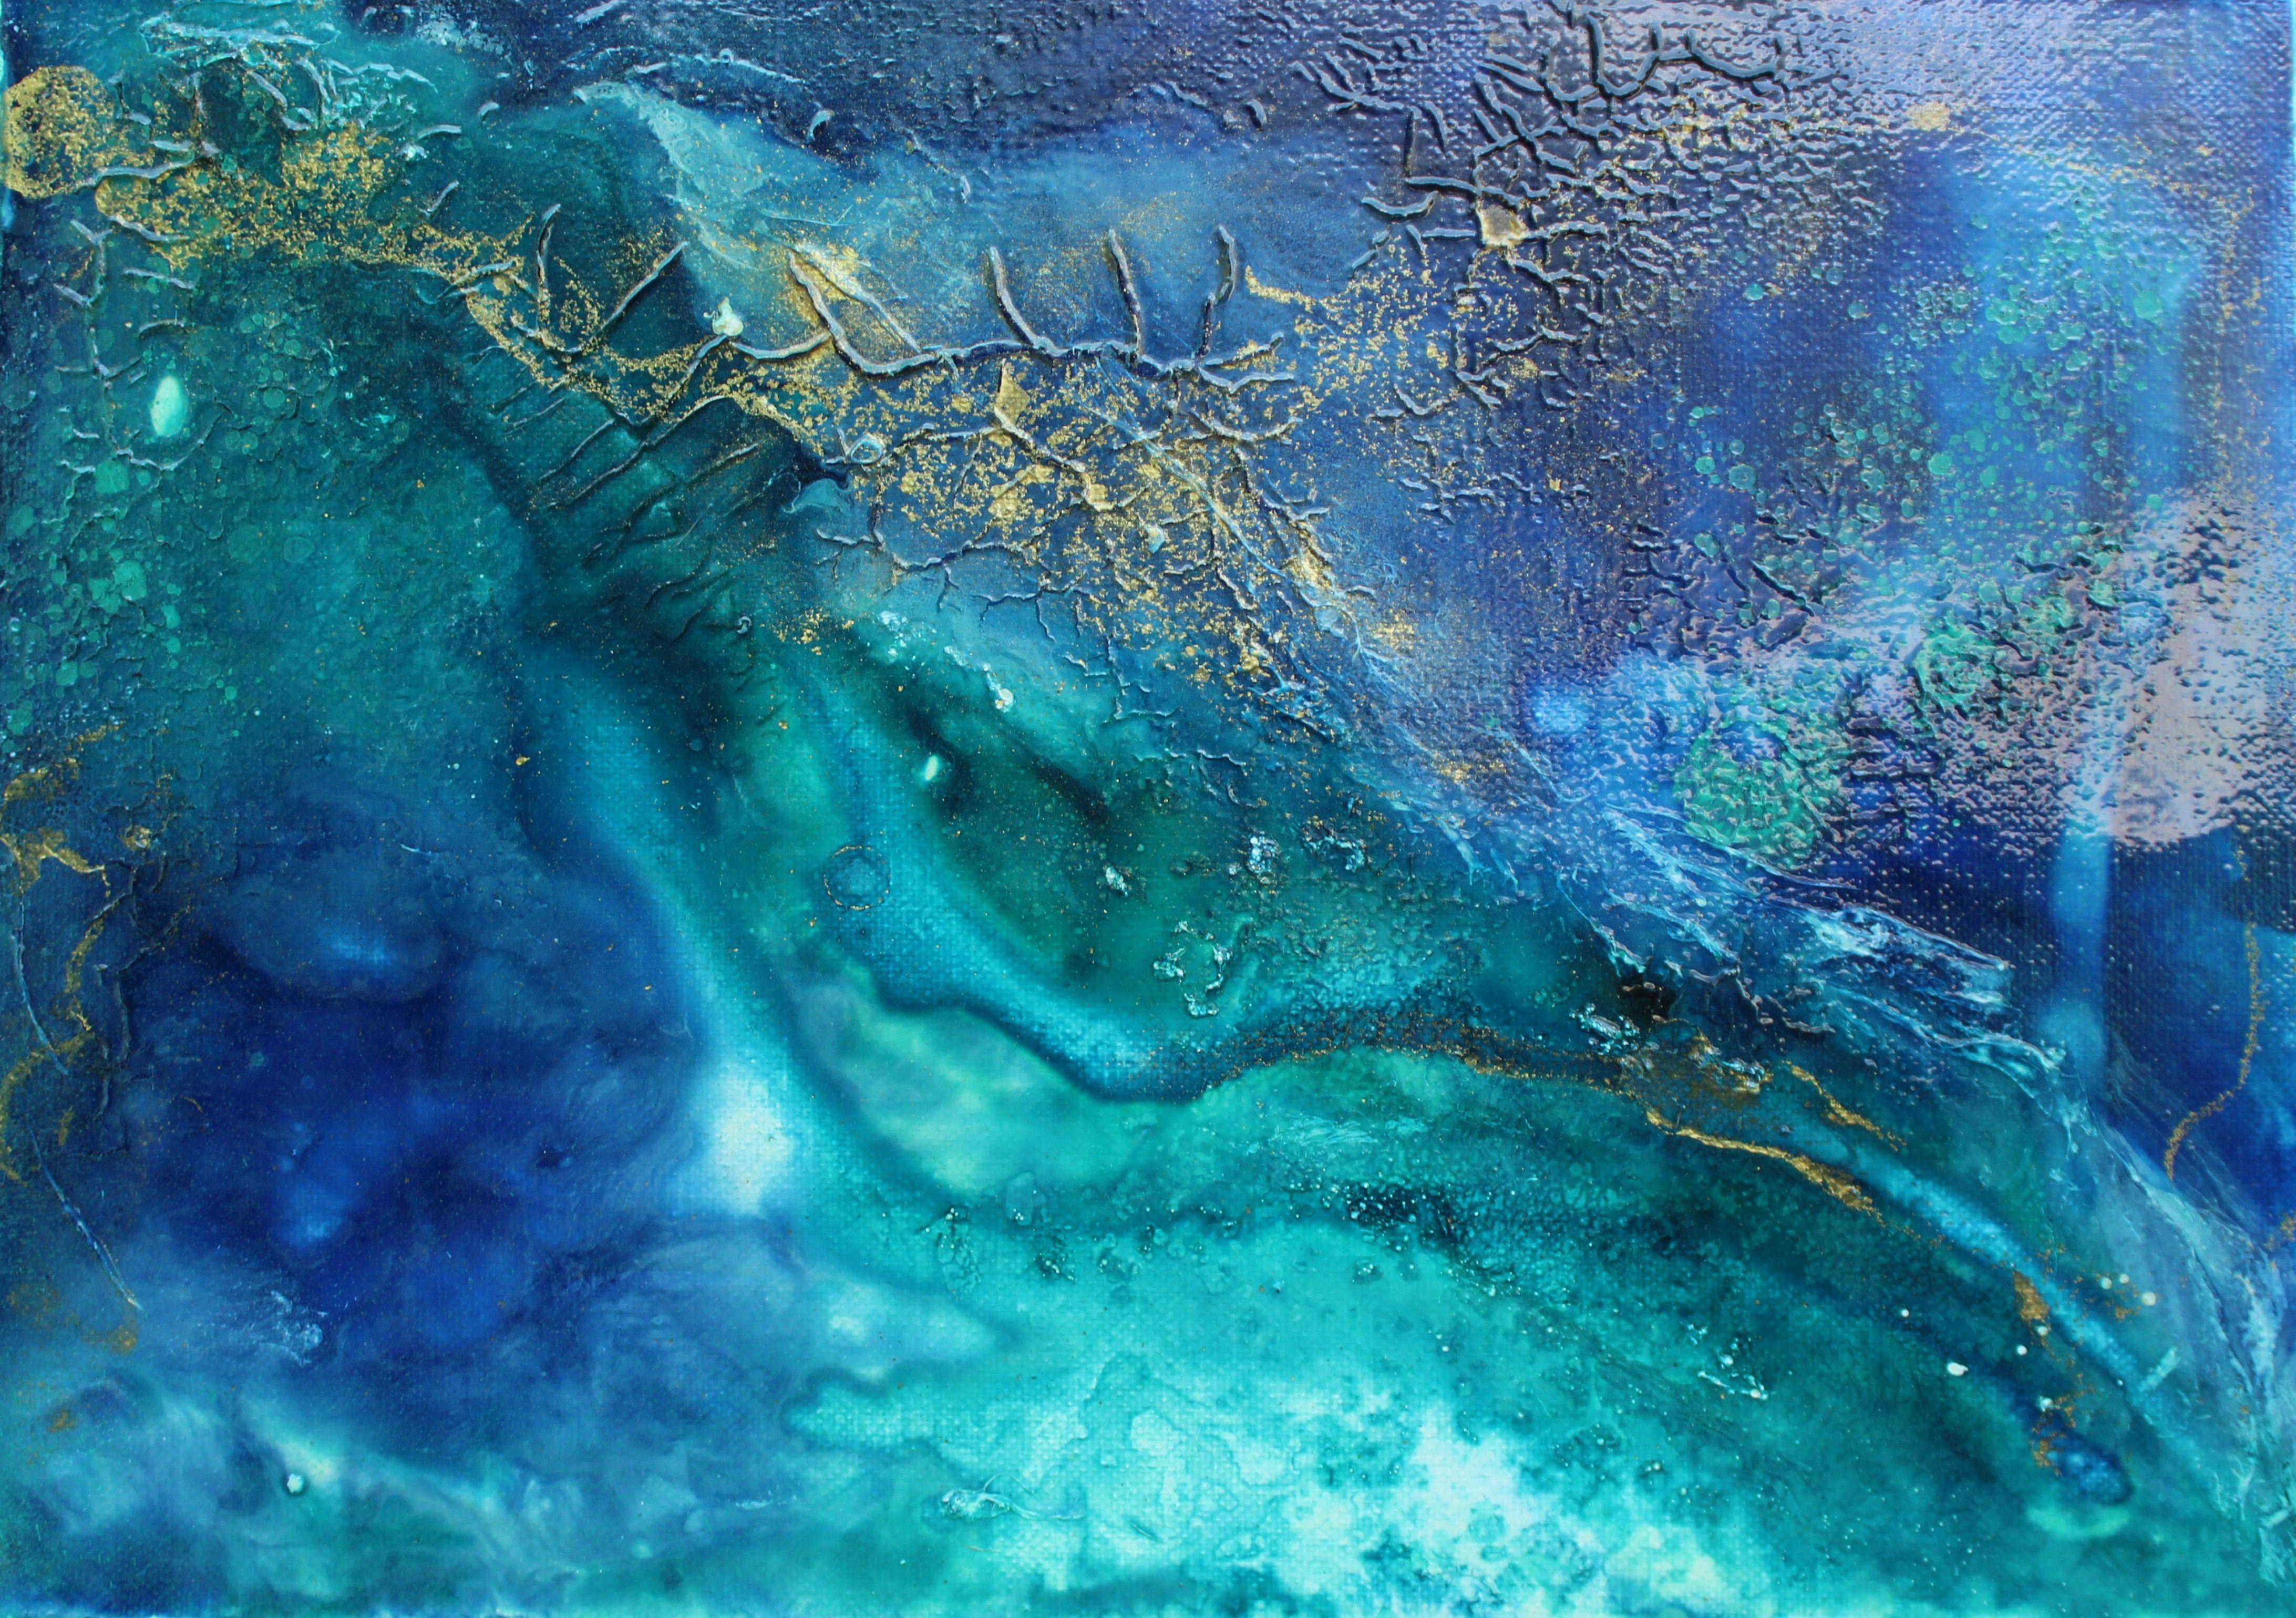 Rachel McCullock Abstract Painting - Tranquil Waters, Painting, Acrylic on Canvas